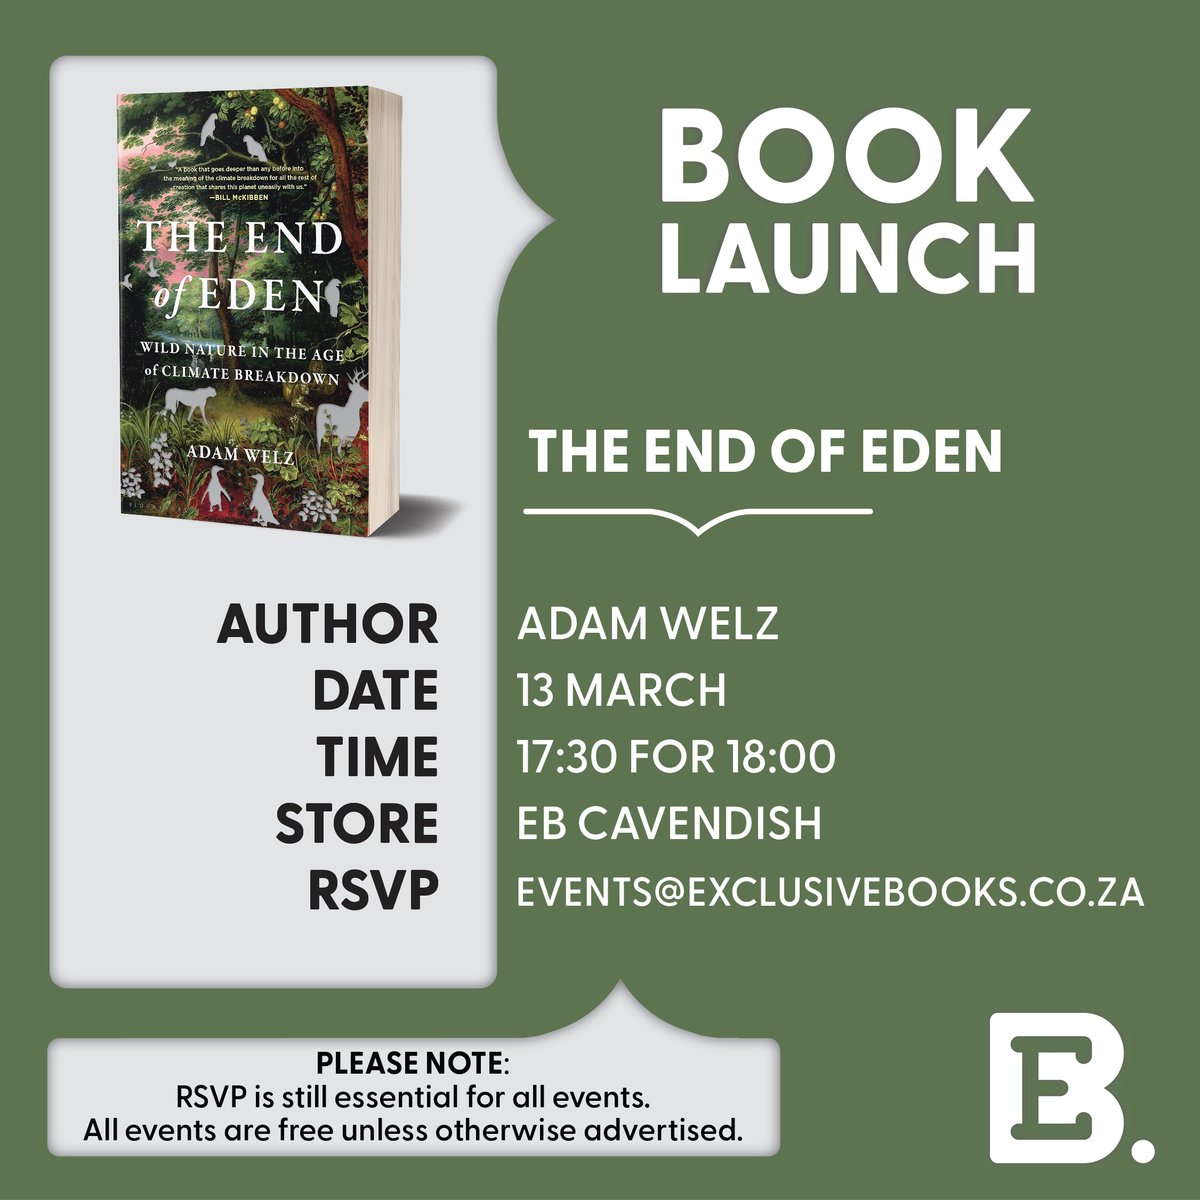 📍🗓️ Join us at EB @CavendishCT for a book launch for The End of Eden by Adam Welz.

The author will be in discussion with Hedley Twidle.

@JonathanBallPub
@AdamWelz

RSVP to events@exclusivebooks.co.za